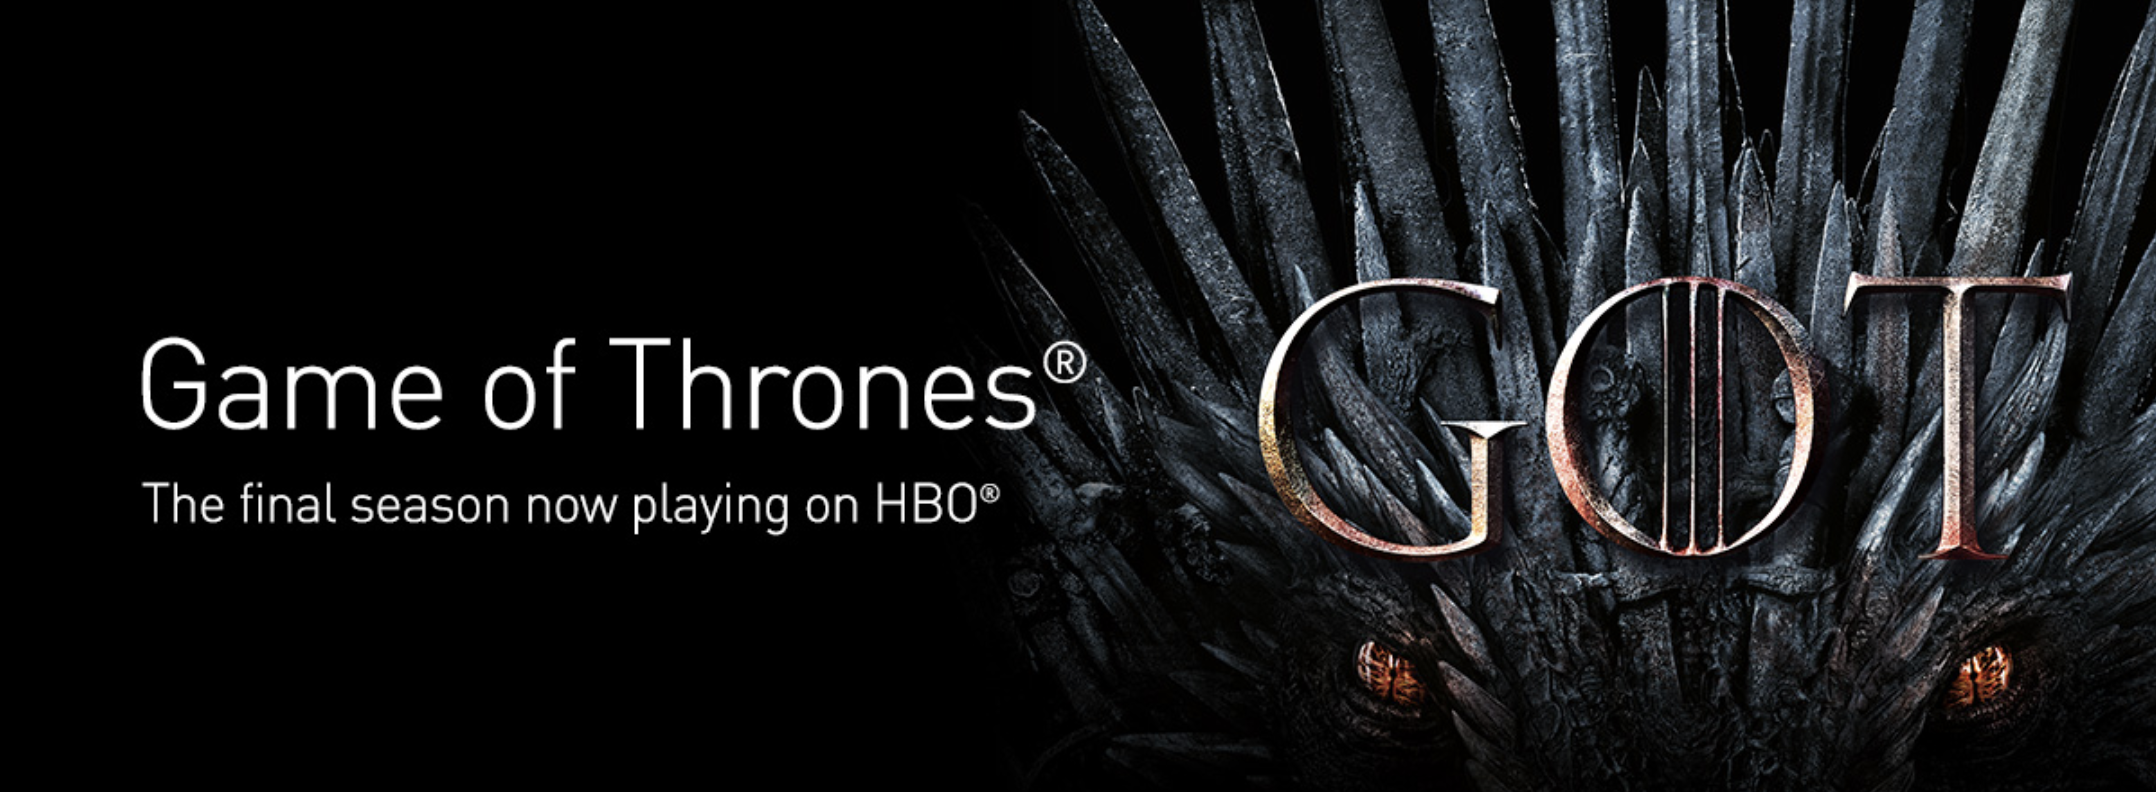 Game of Thrones logo on HBO and the iron throne in the background